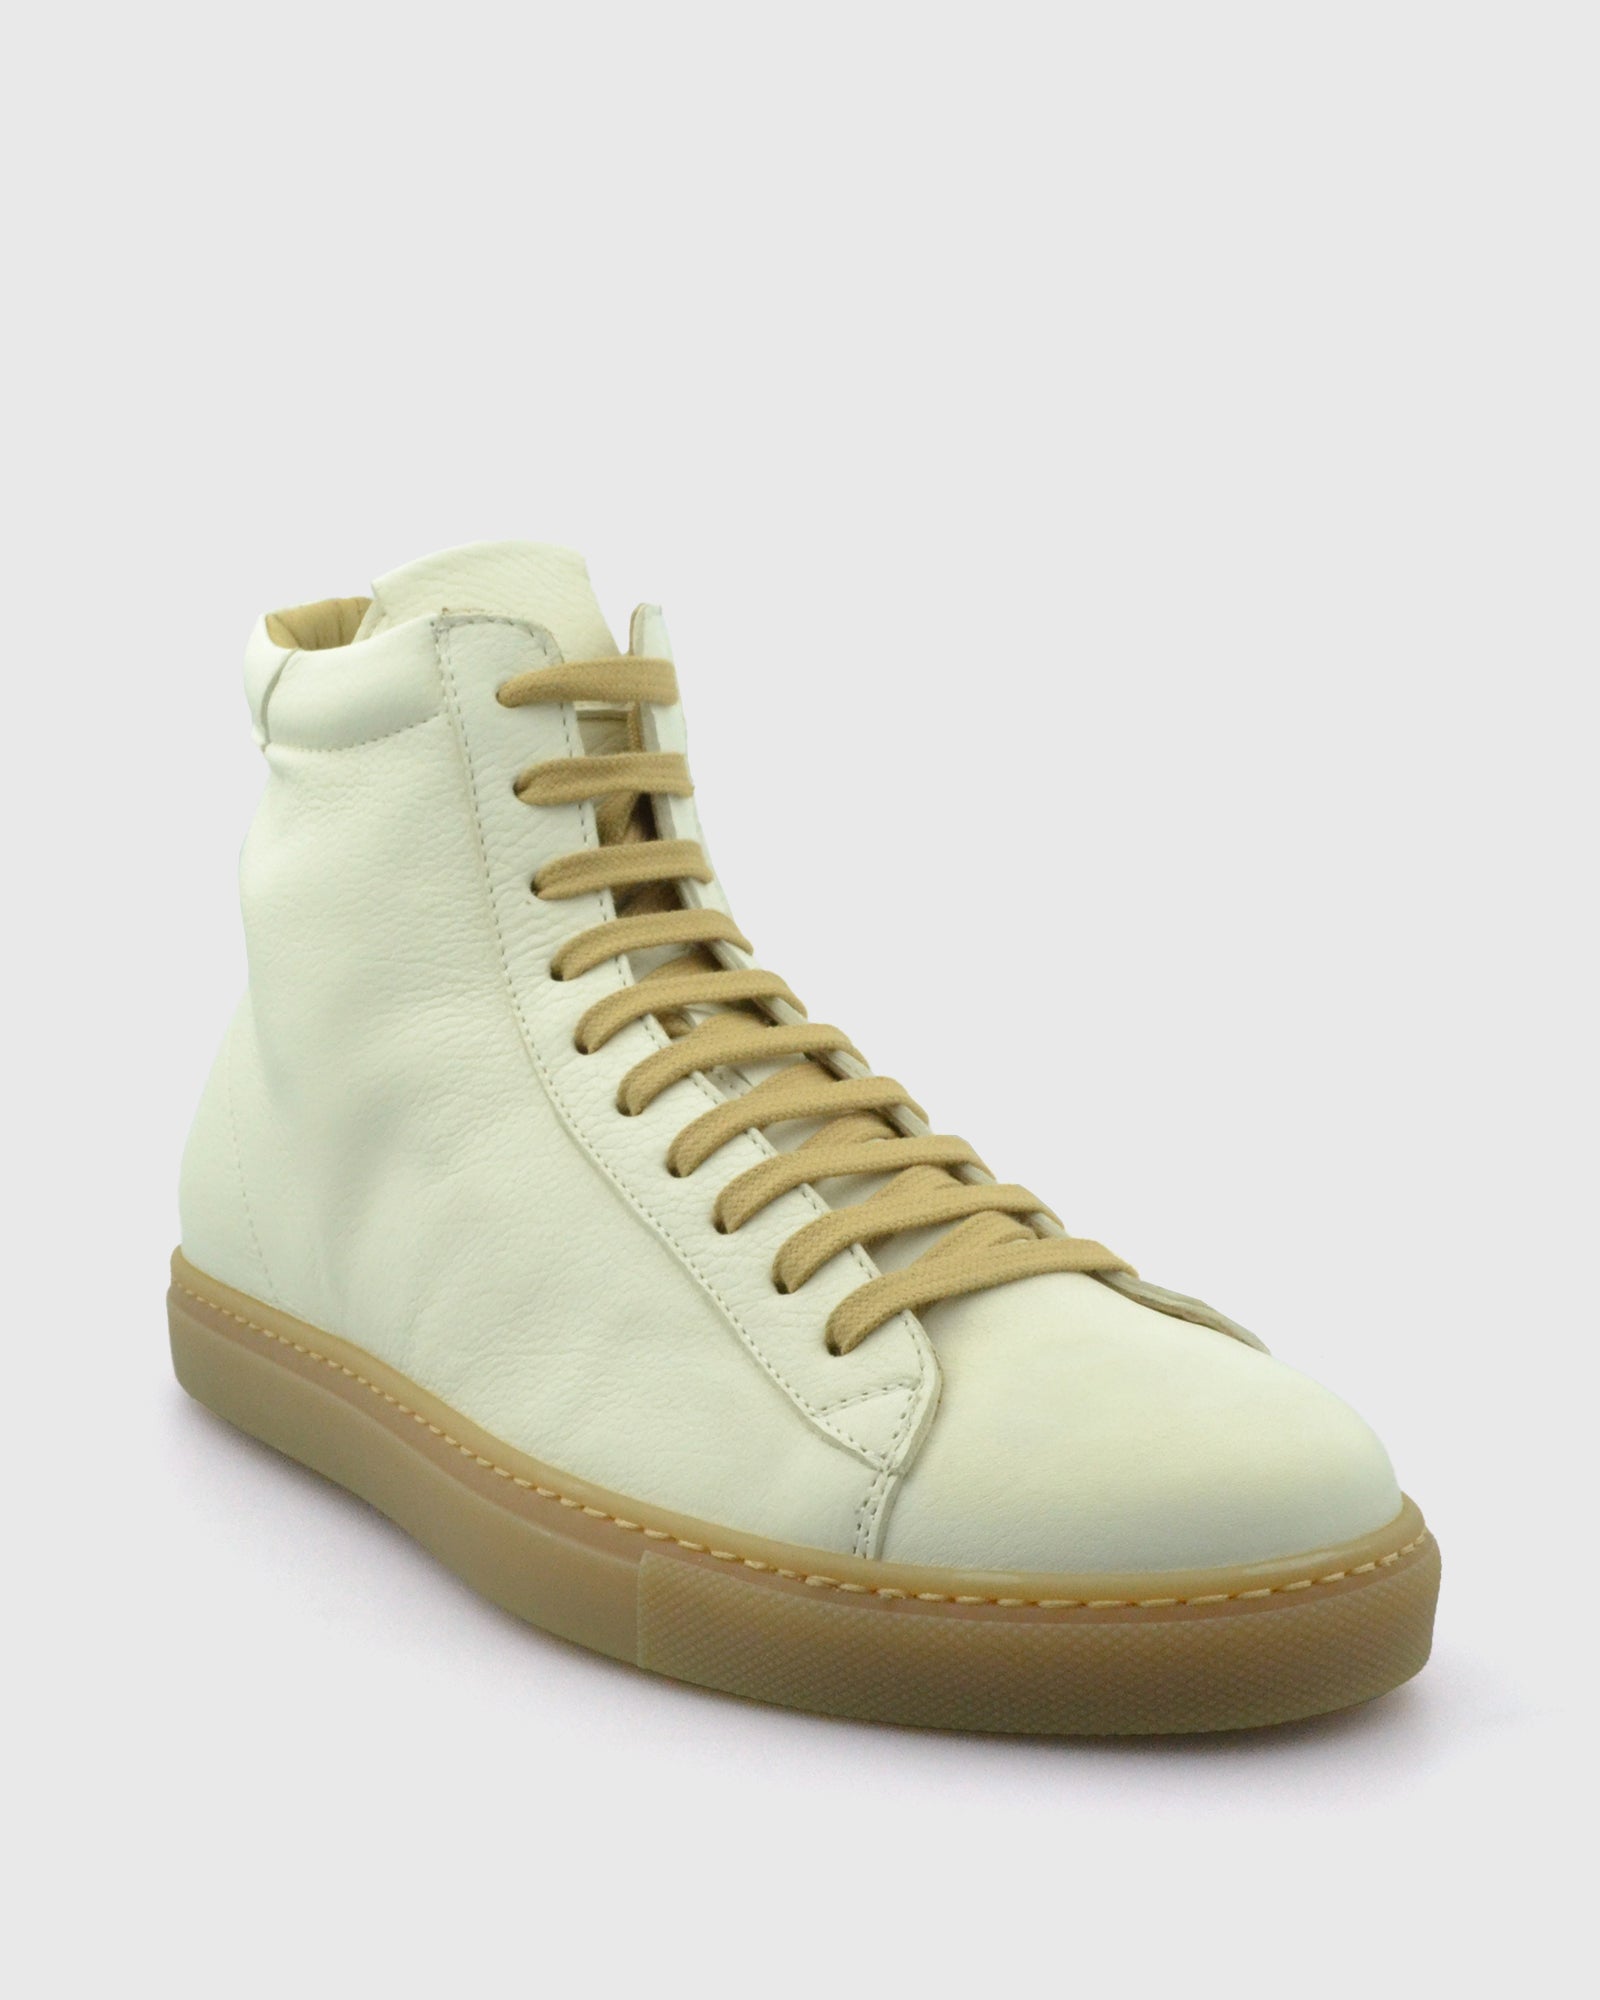 VINCENT & FRANKS VFW23 PUTTY HIGH-TOP LEATHER SNEAKER